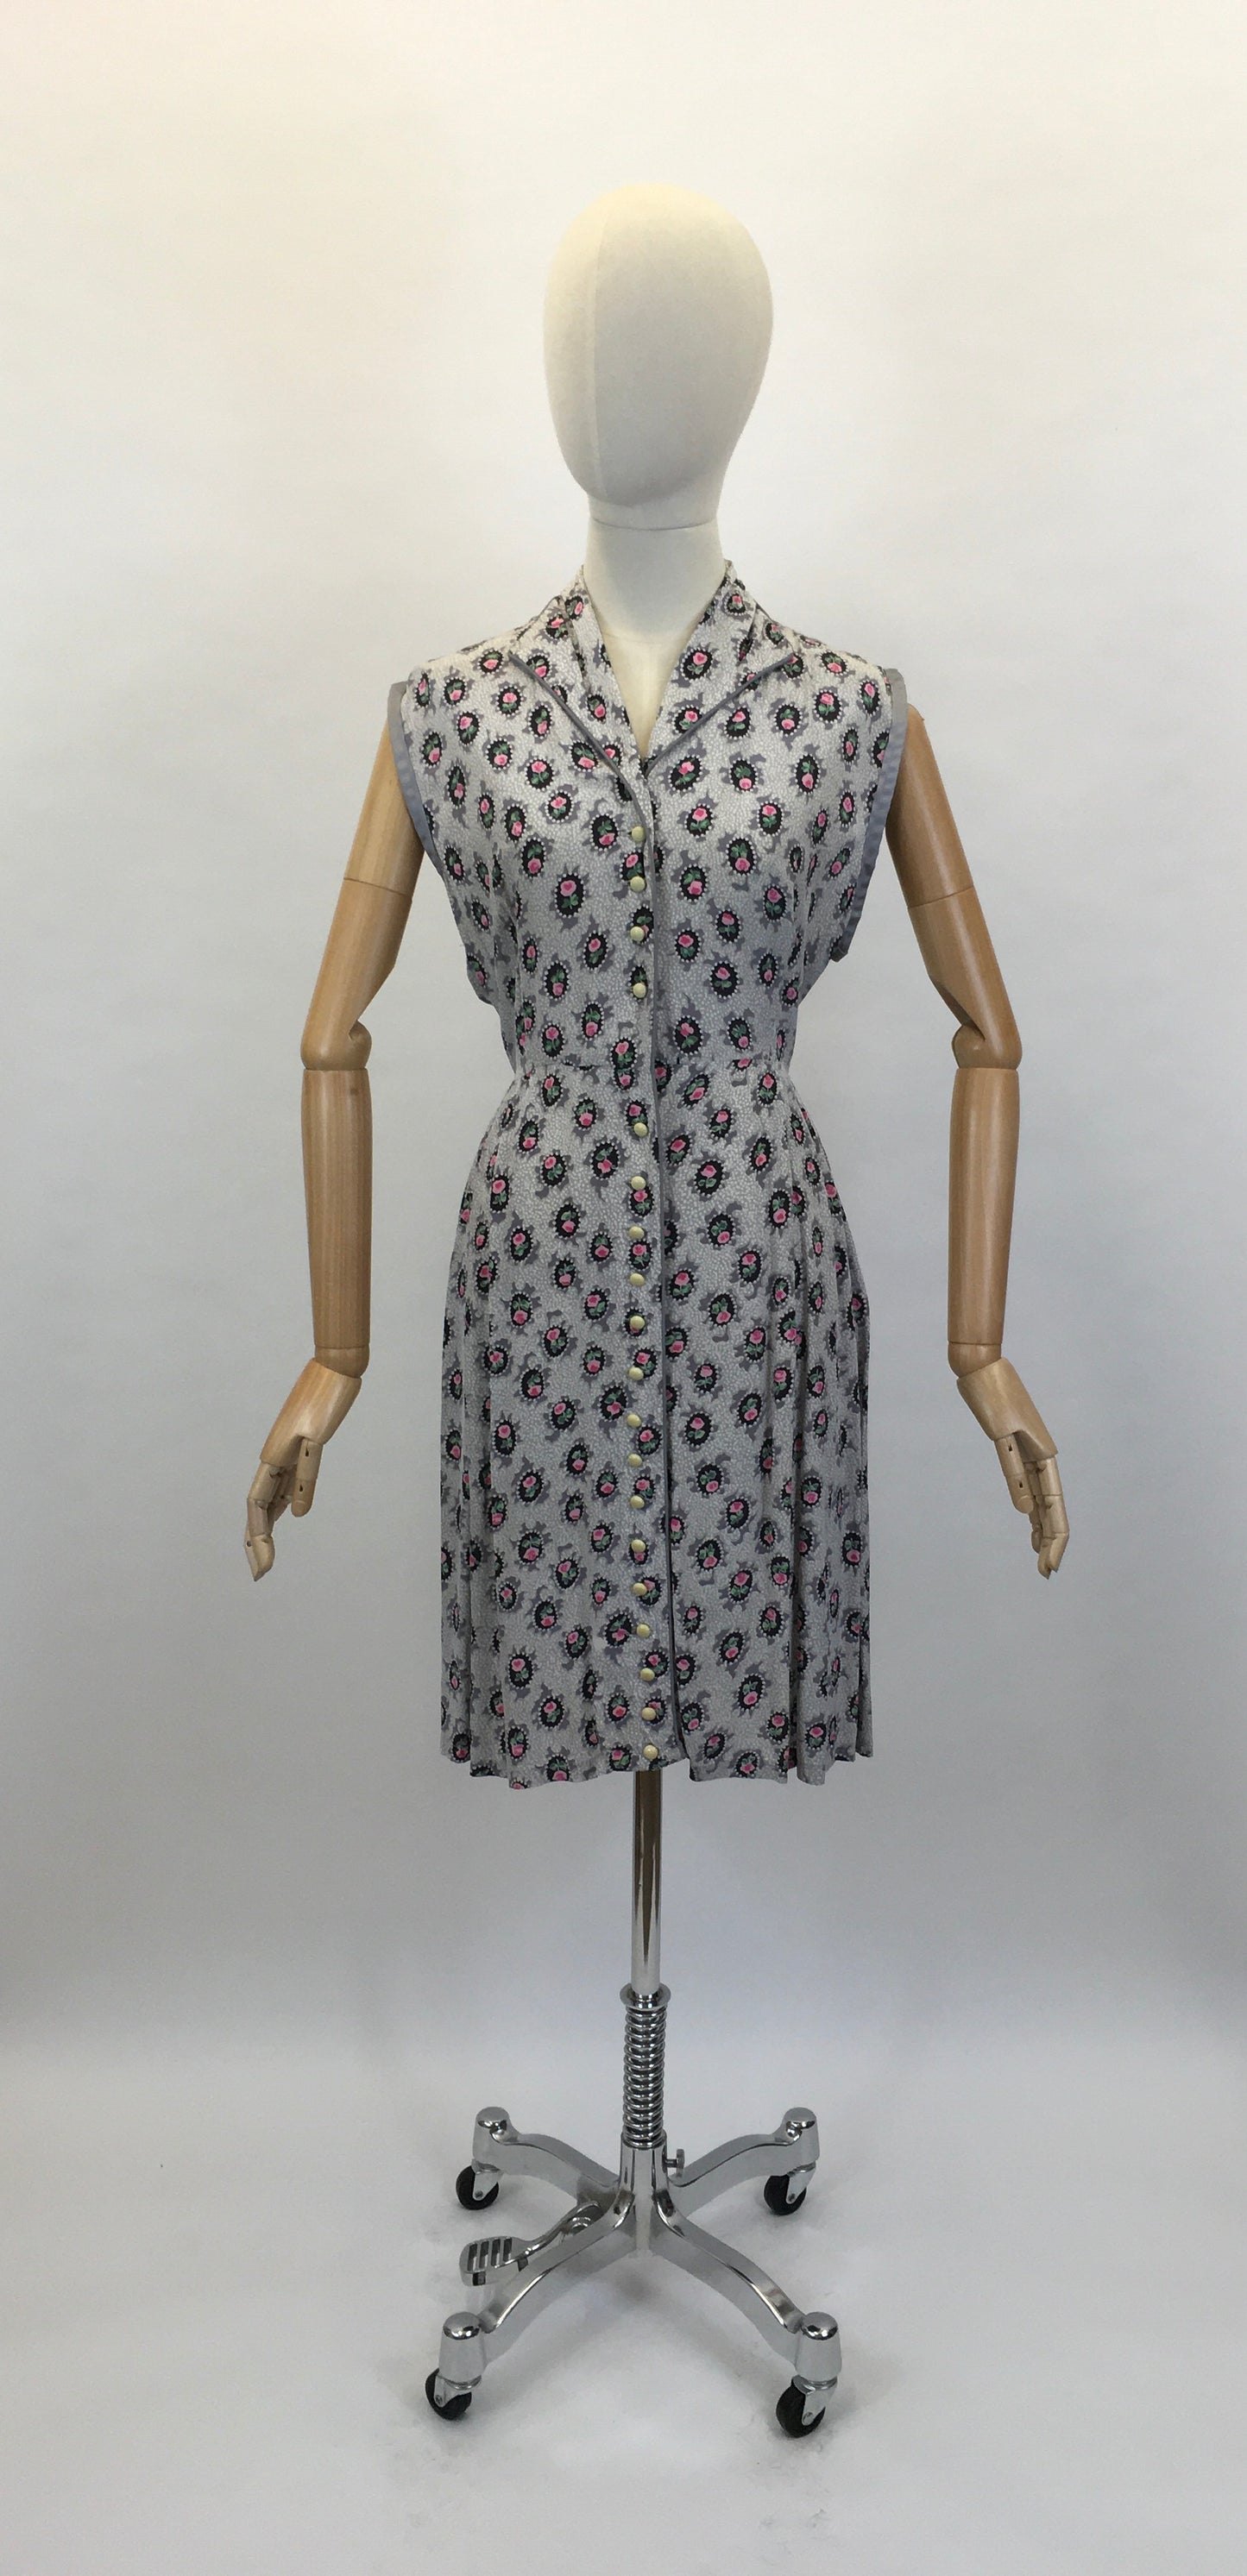 Original 1950’s Cute Button Front Dress - In A Lovely Pretty Cameo Floral